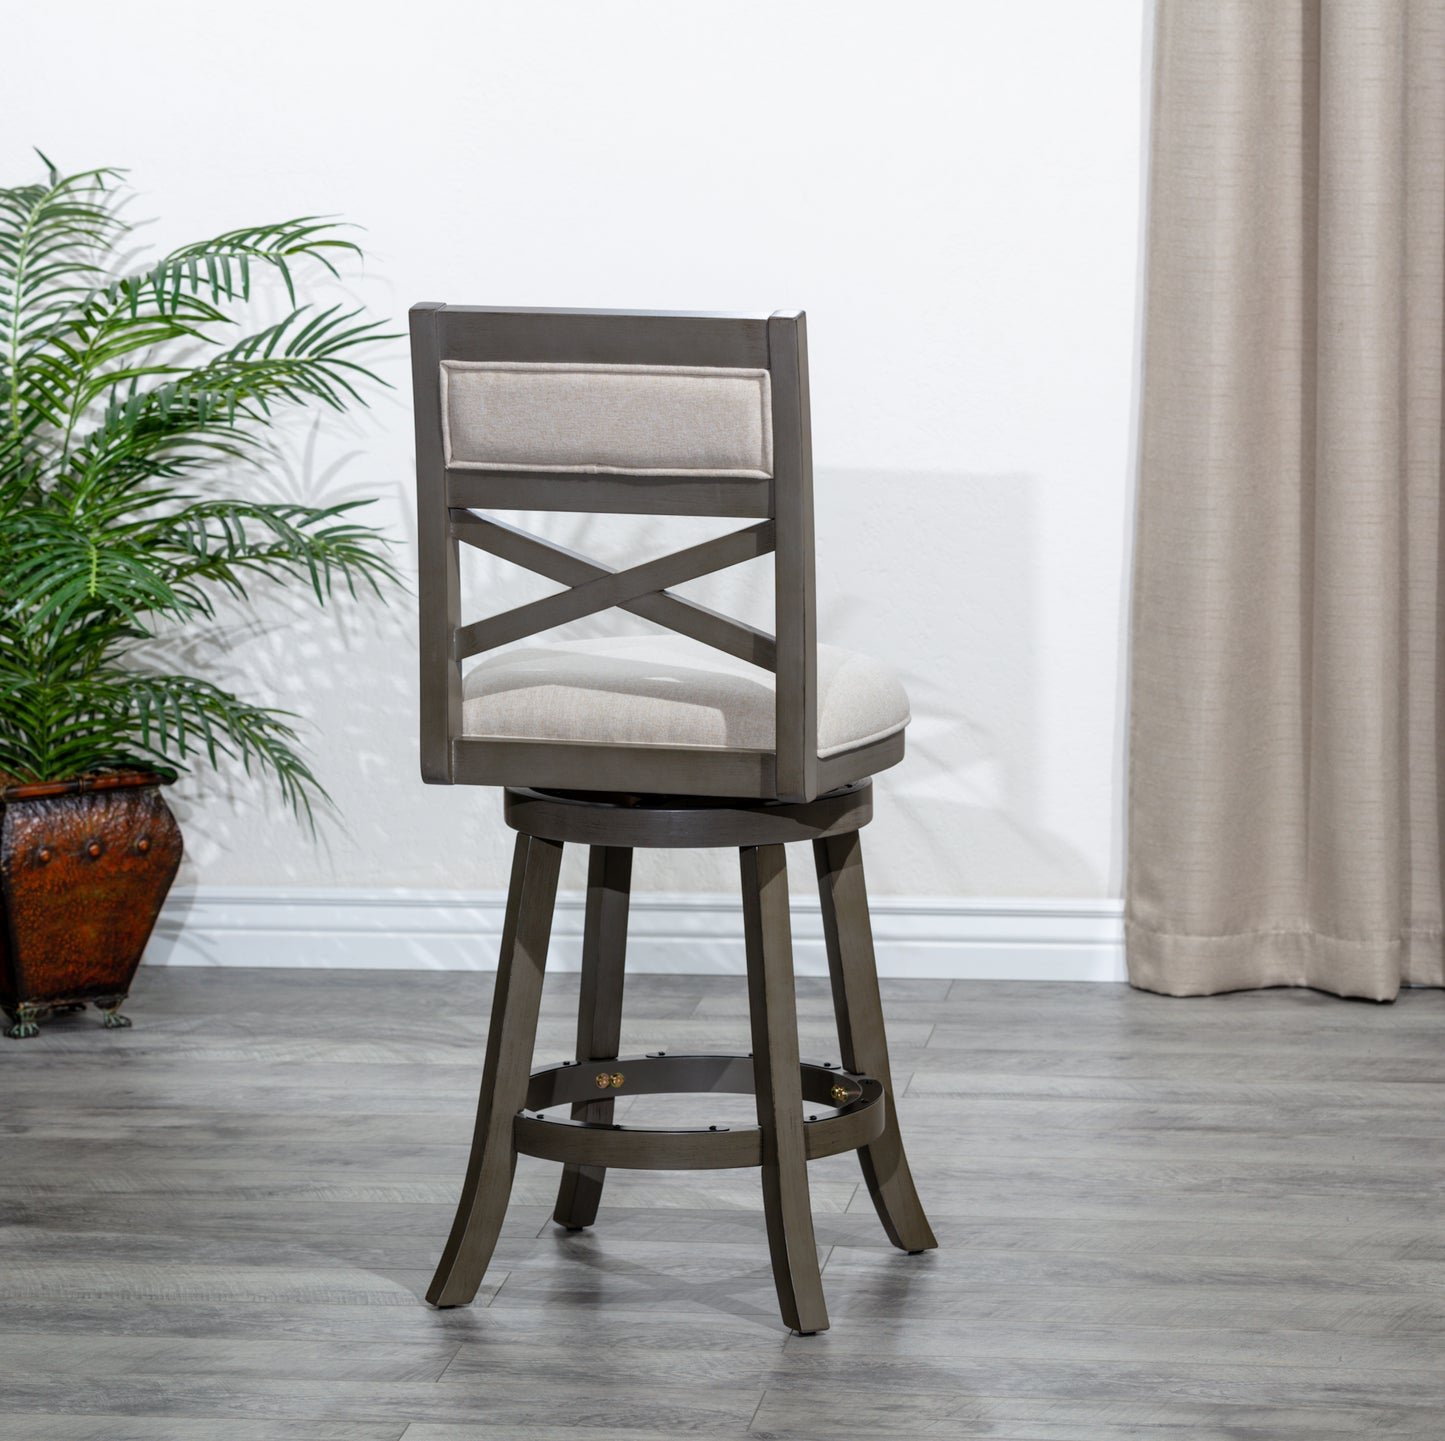 DTY Home 30" Swivel Bar Stool in Weathered Gray with Beige Fabric Seat